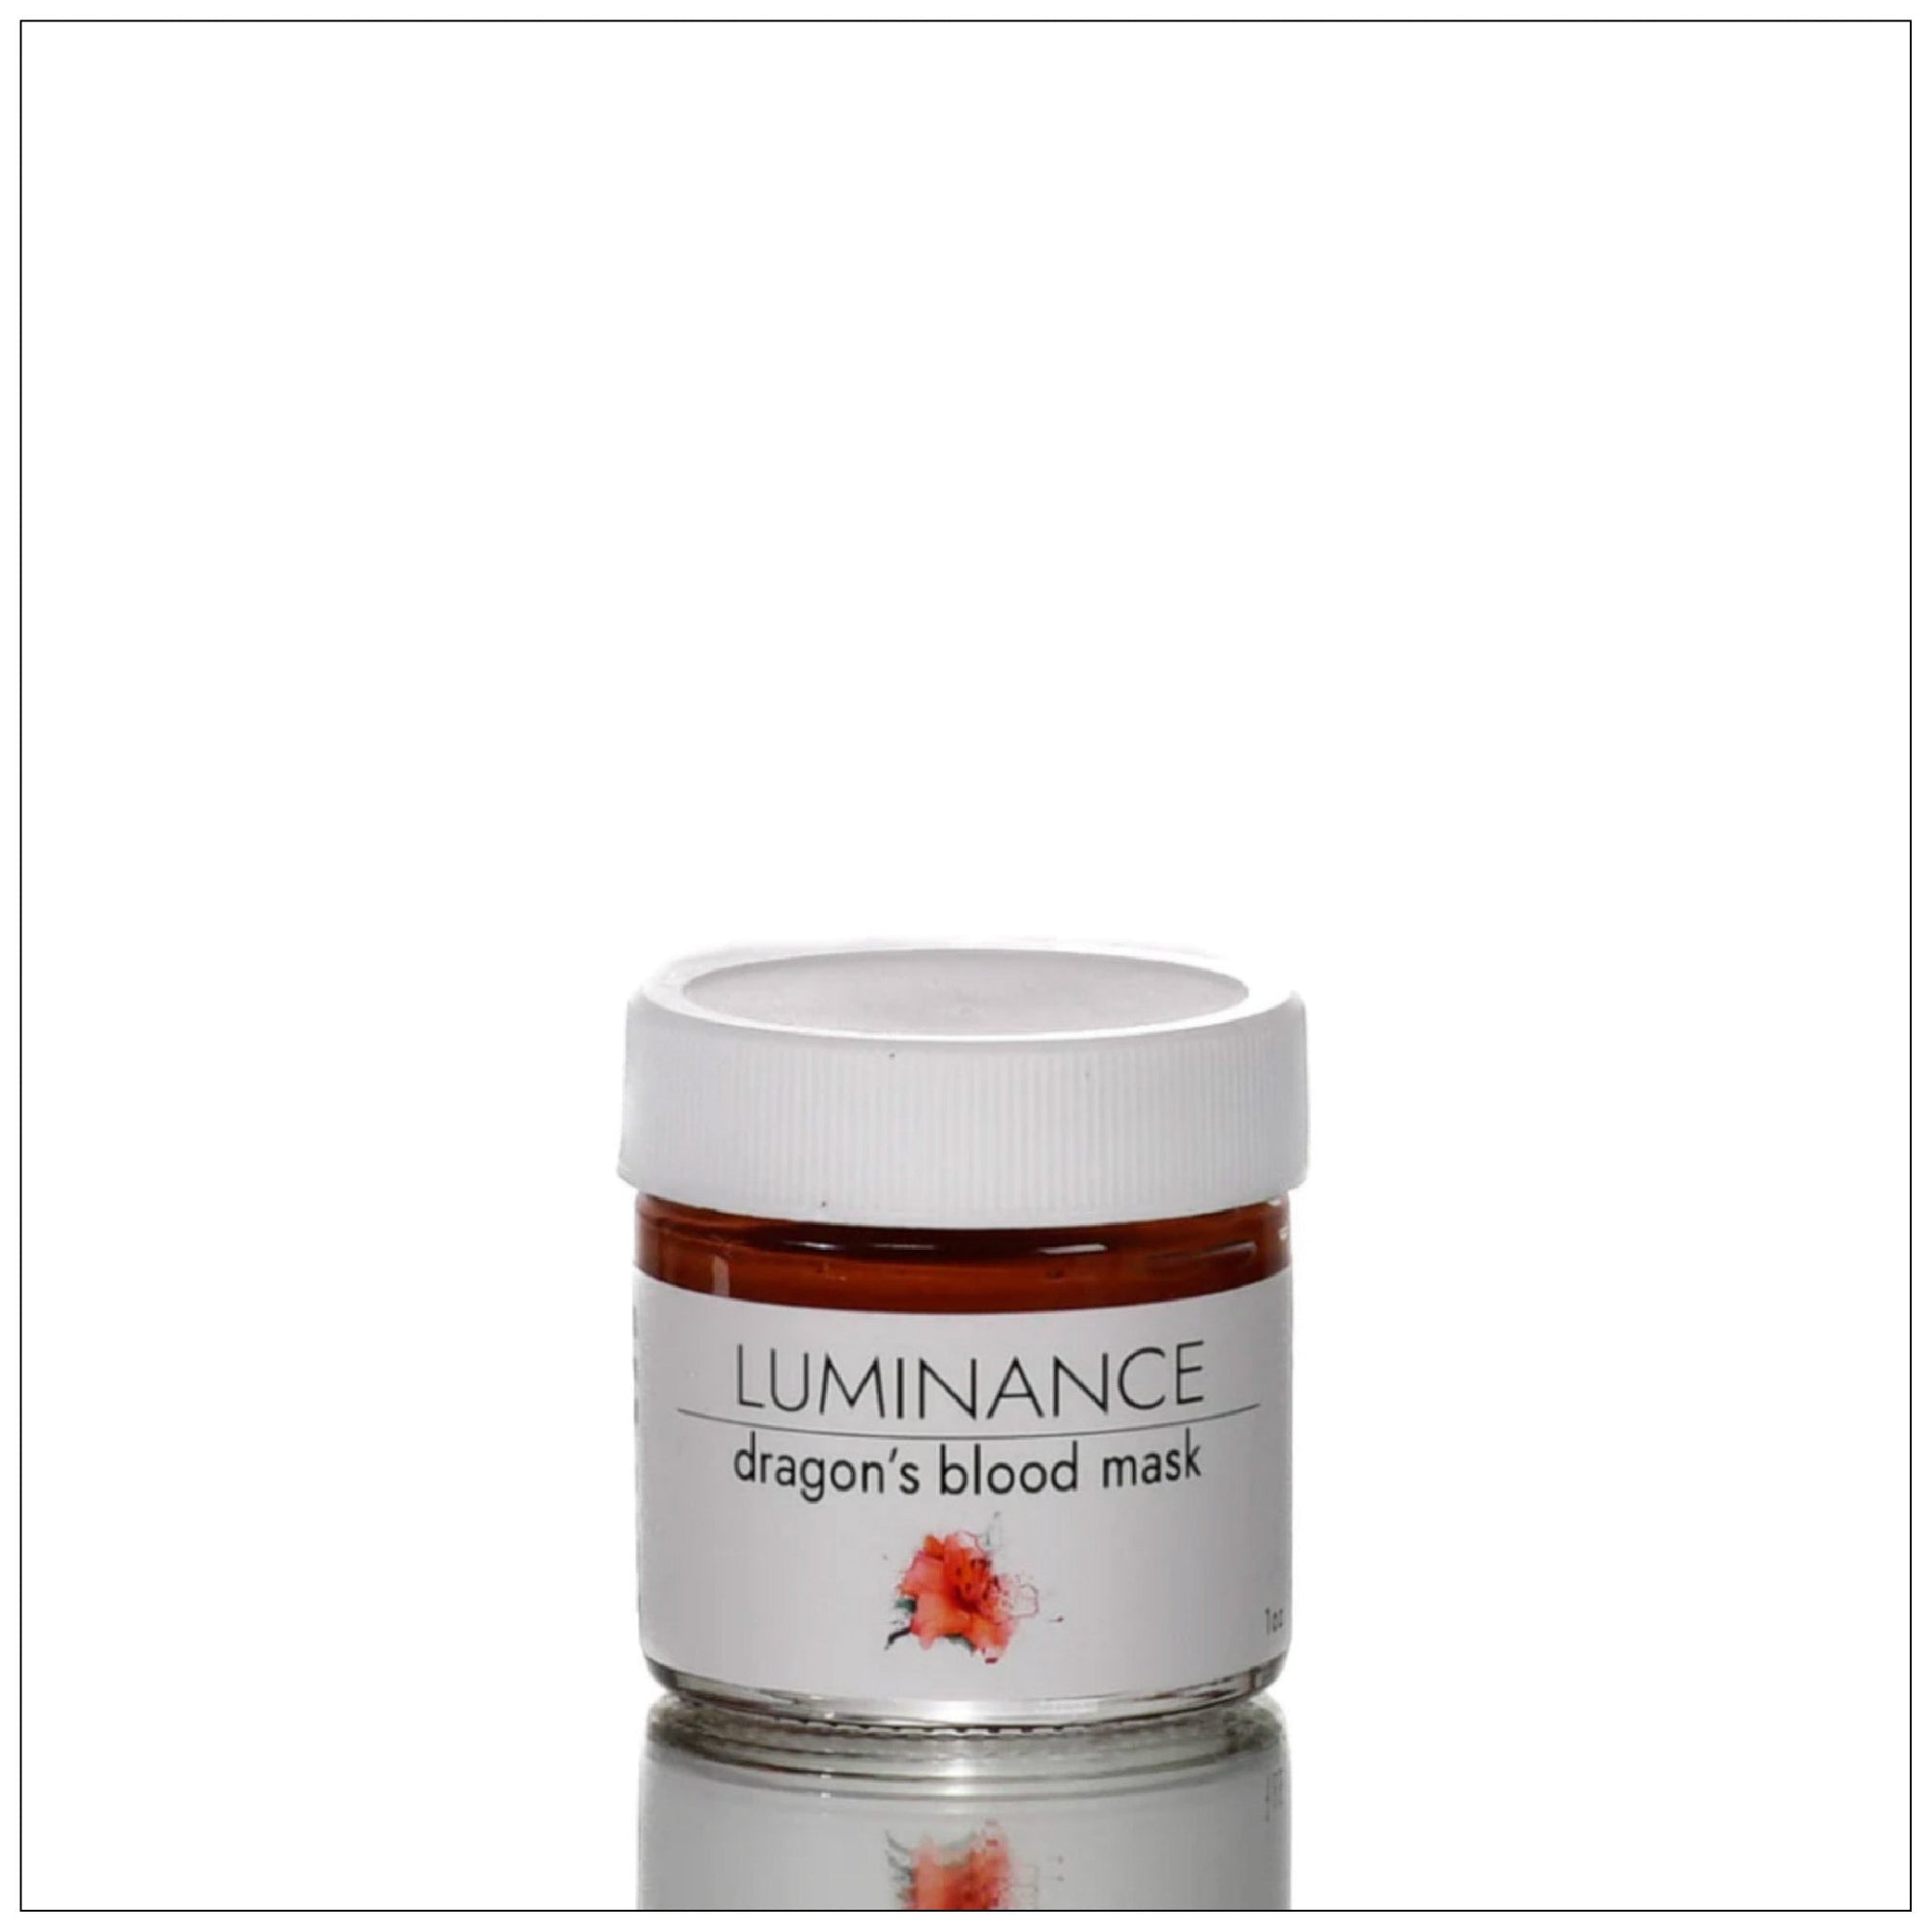 Clean Dragons Blood Facial Mask - 100% Plant Based. Luminance Skincare